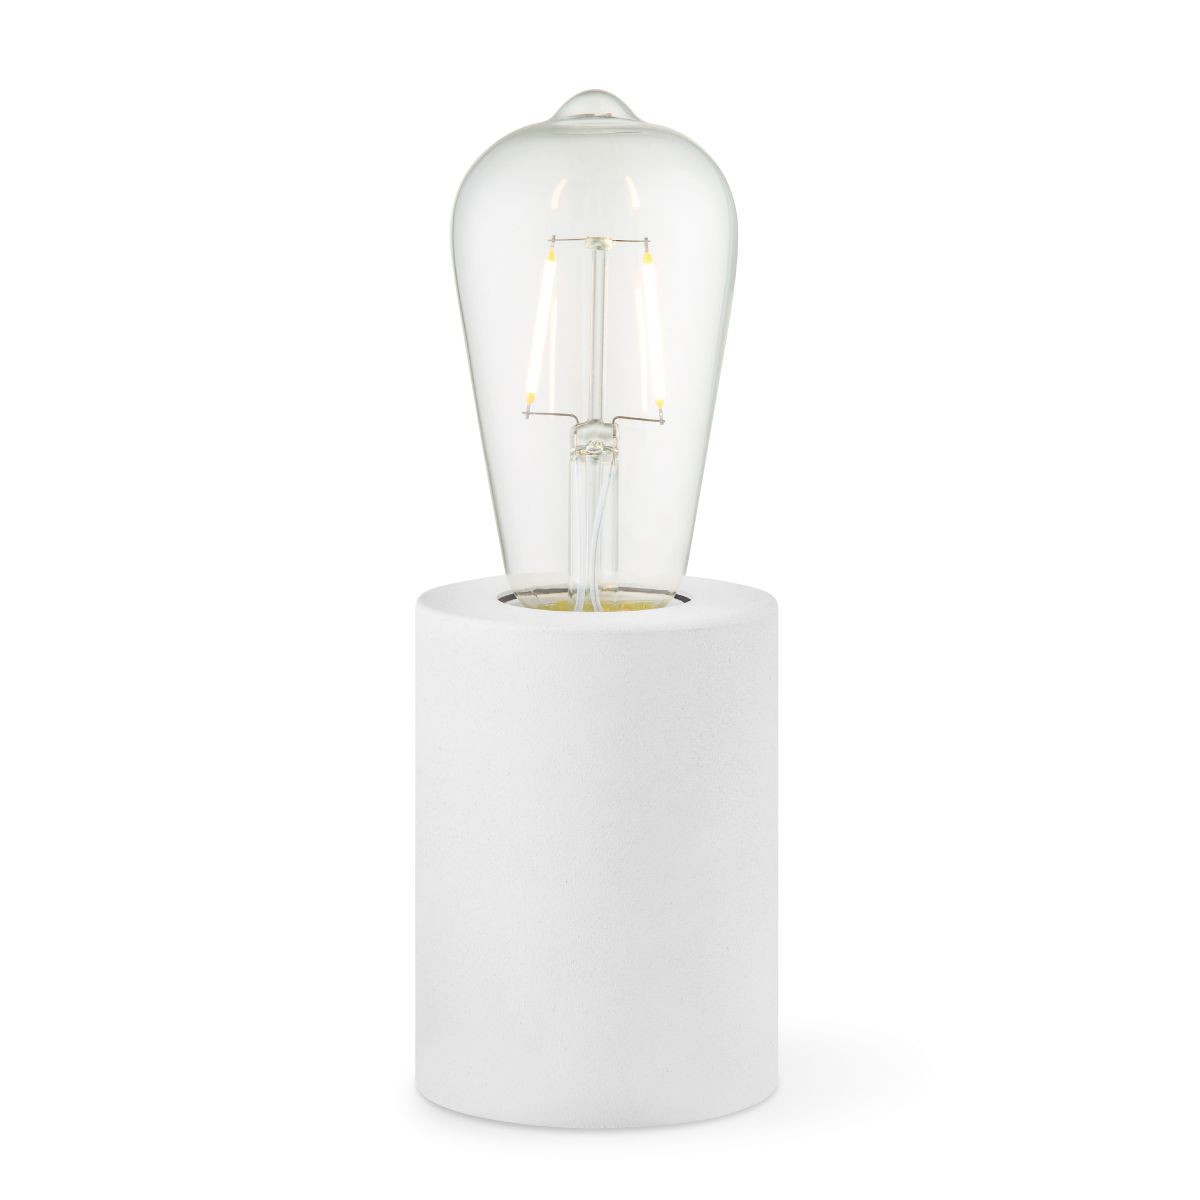 Light depot - tafellamp Dry 10 rond - wit - Outlet